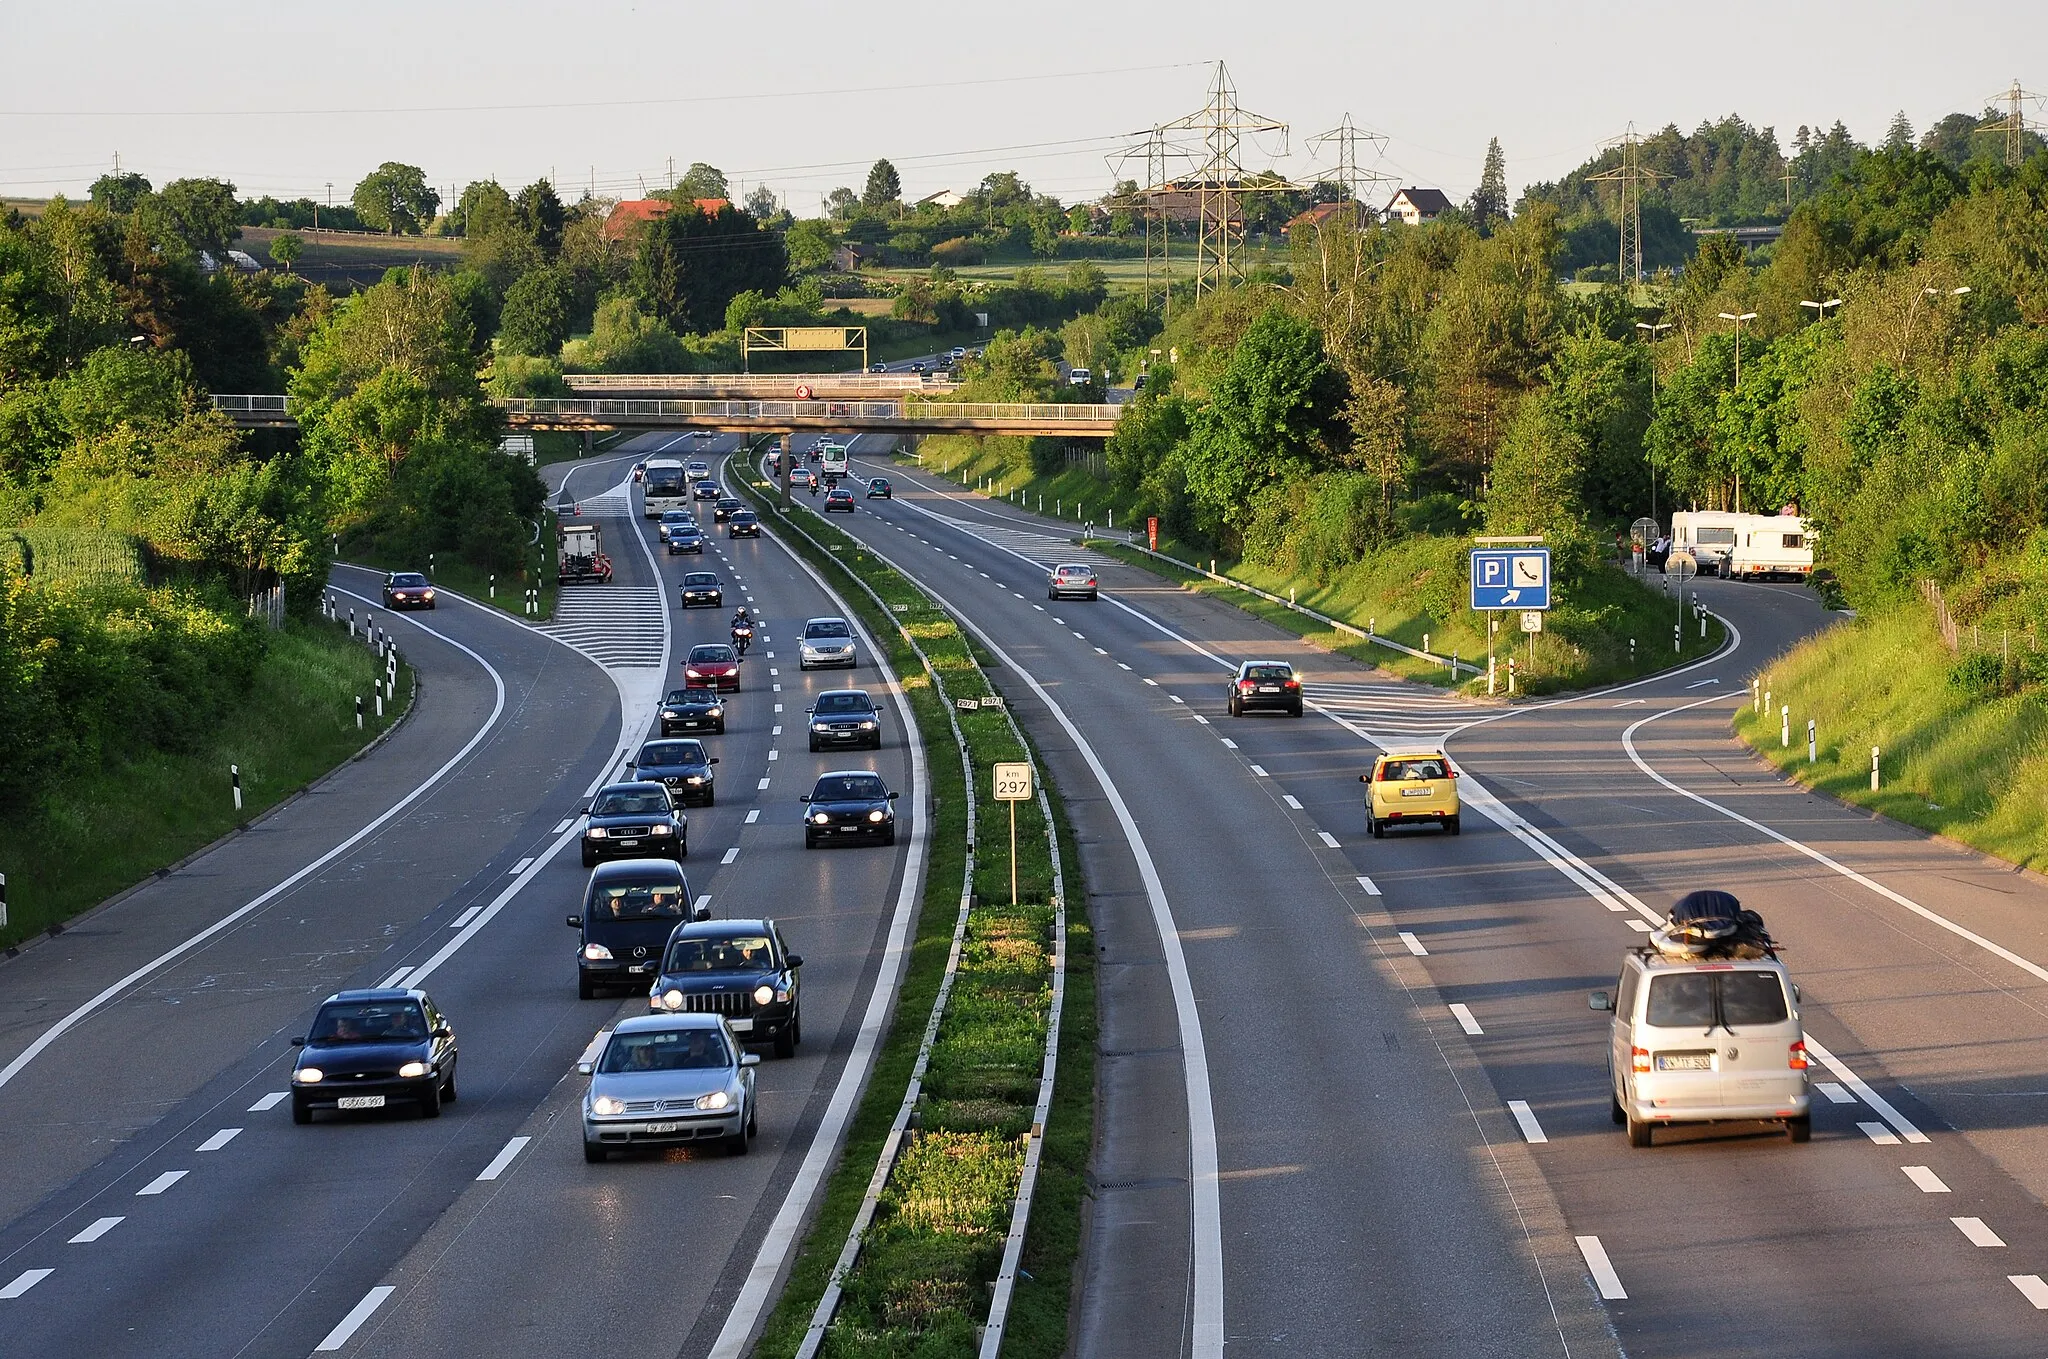 Photo showing: A1 between Zürich-Affoltern and Rümlang (Switzerland), Affoltern to the right.